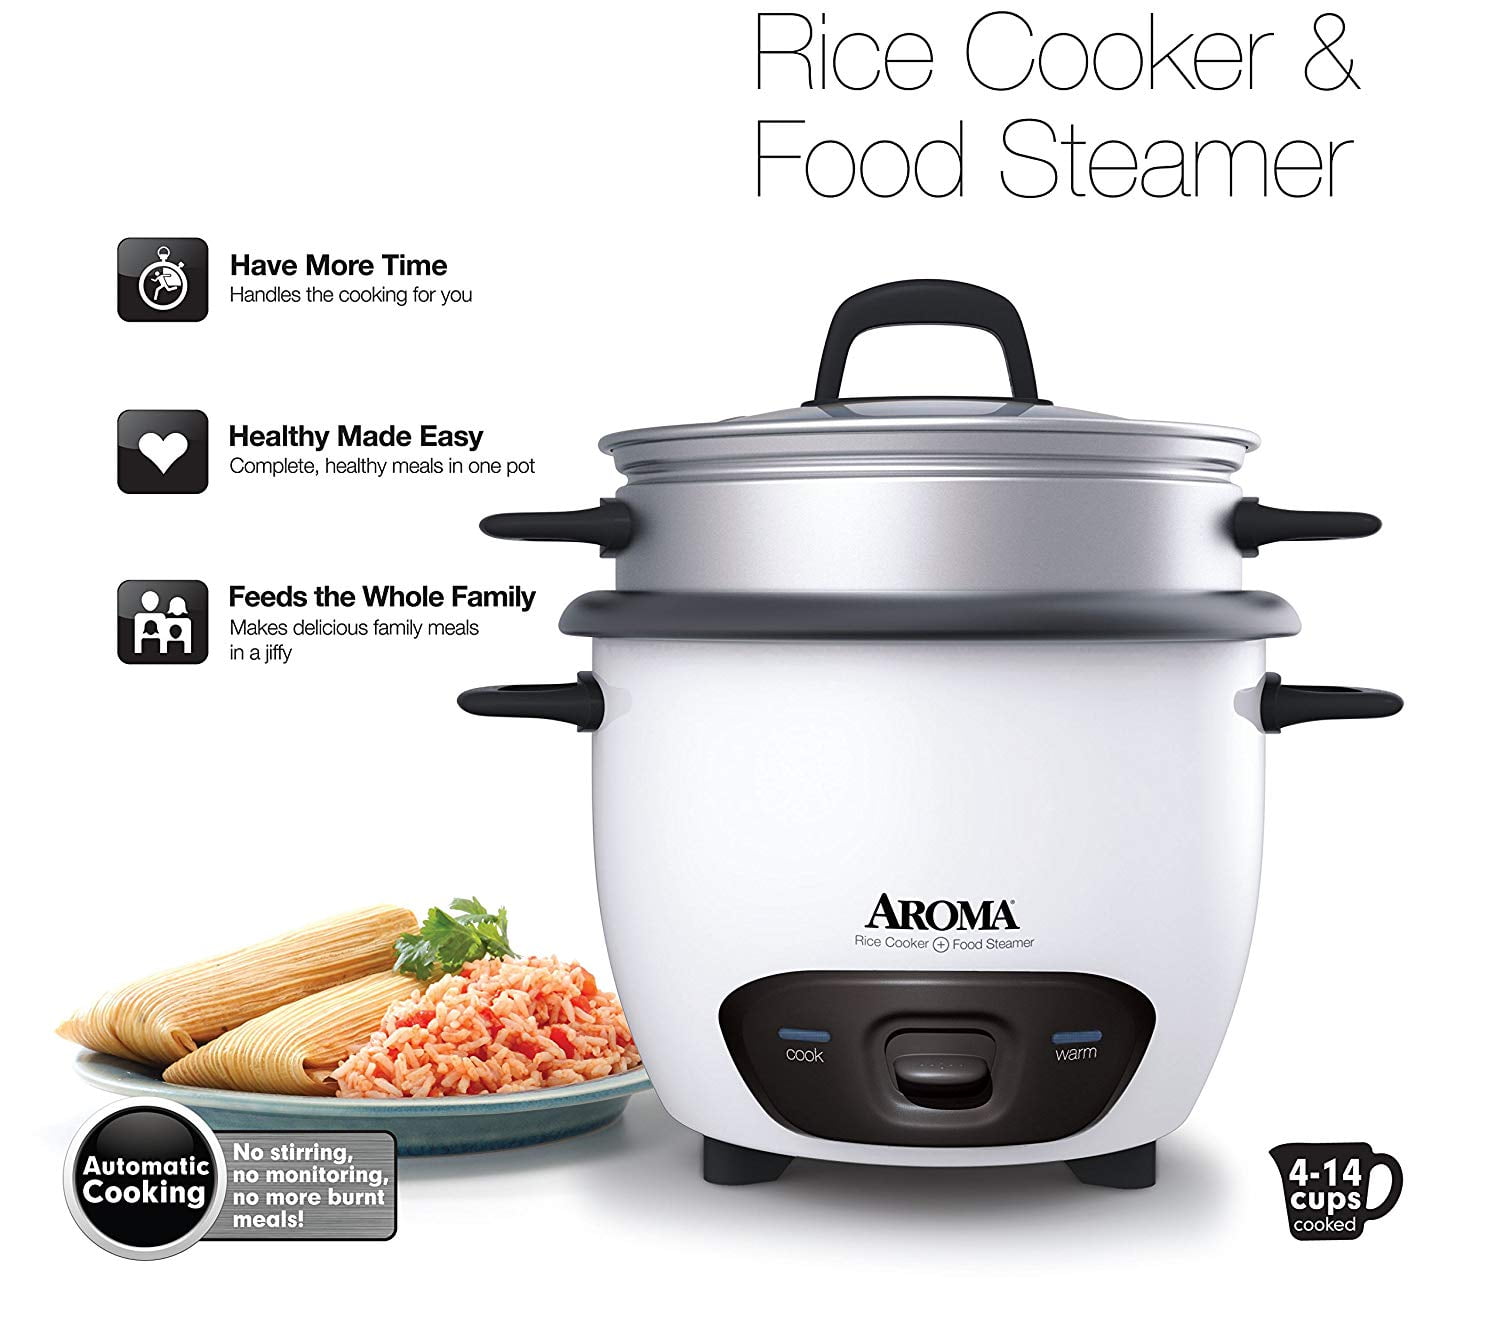 AROMA® 14-Cup (Cooked) / 3Qt. Select Stainless® Rice & Grain Cooker, White,  New, ARC-757-1SG 